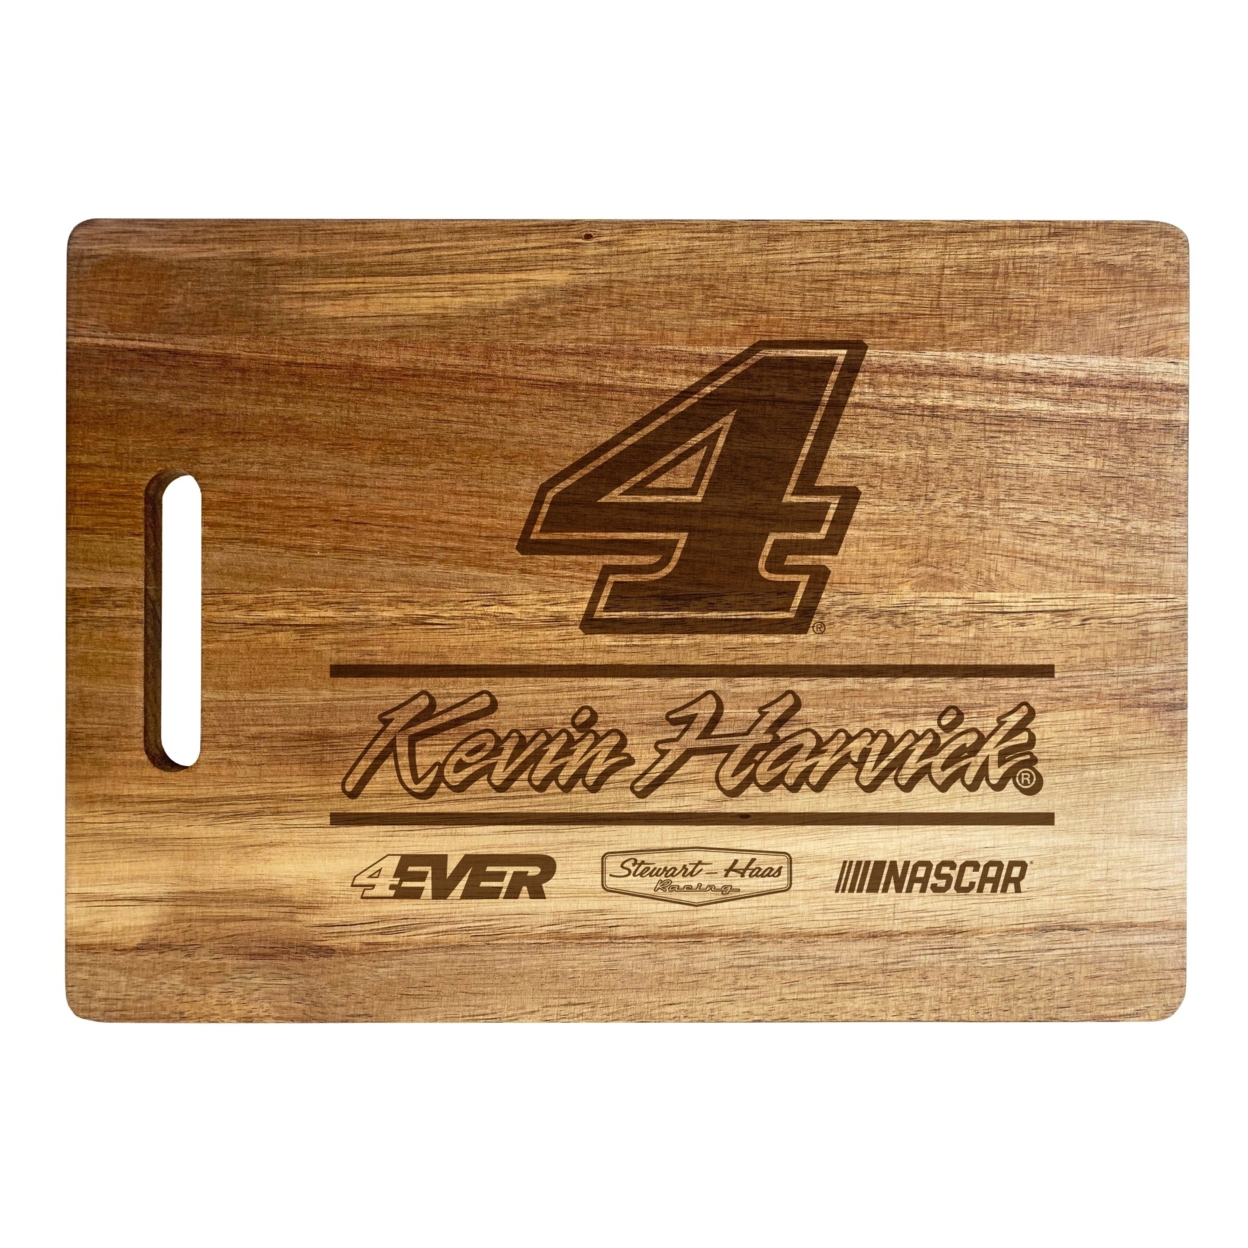 #4 Kevin Harvick NASCAR Officially Licensed Engraved Wooden Cutting Board